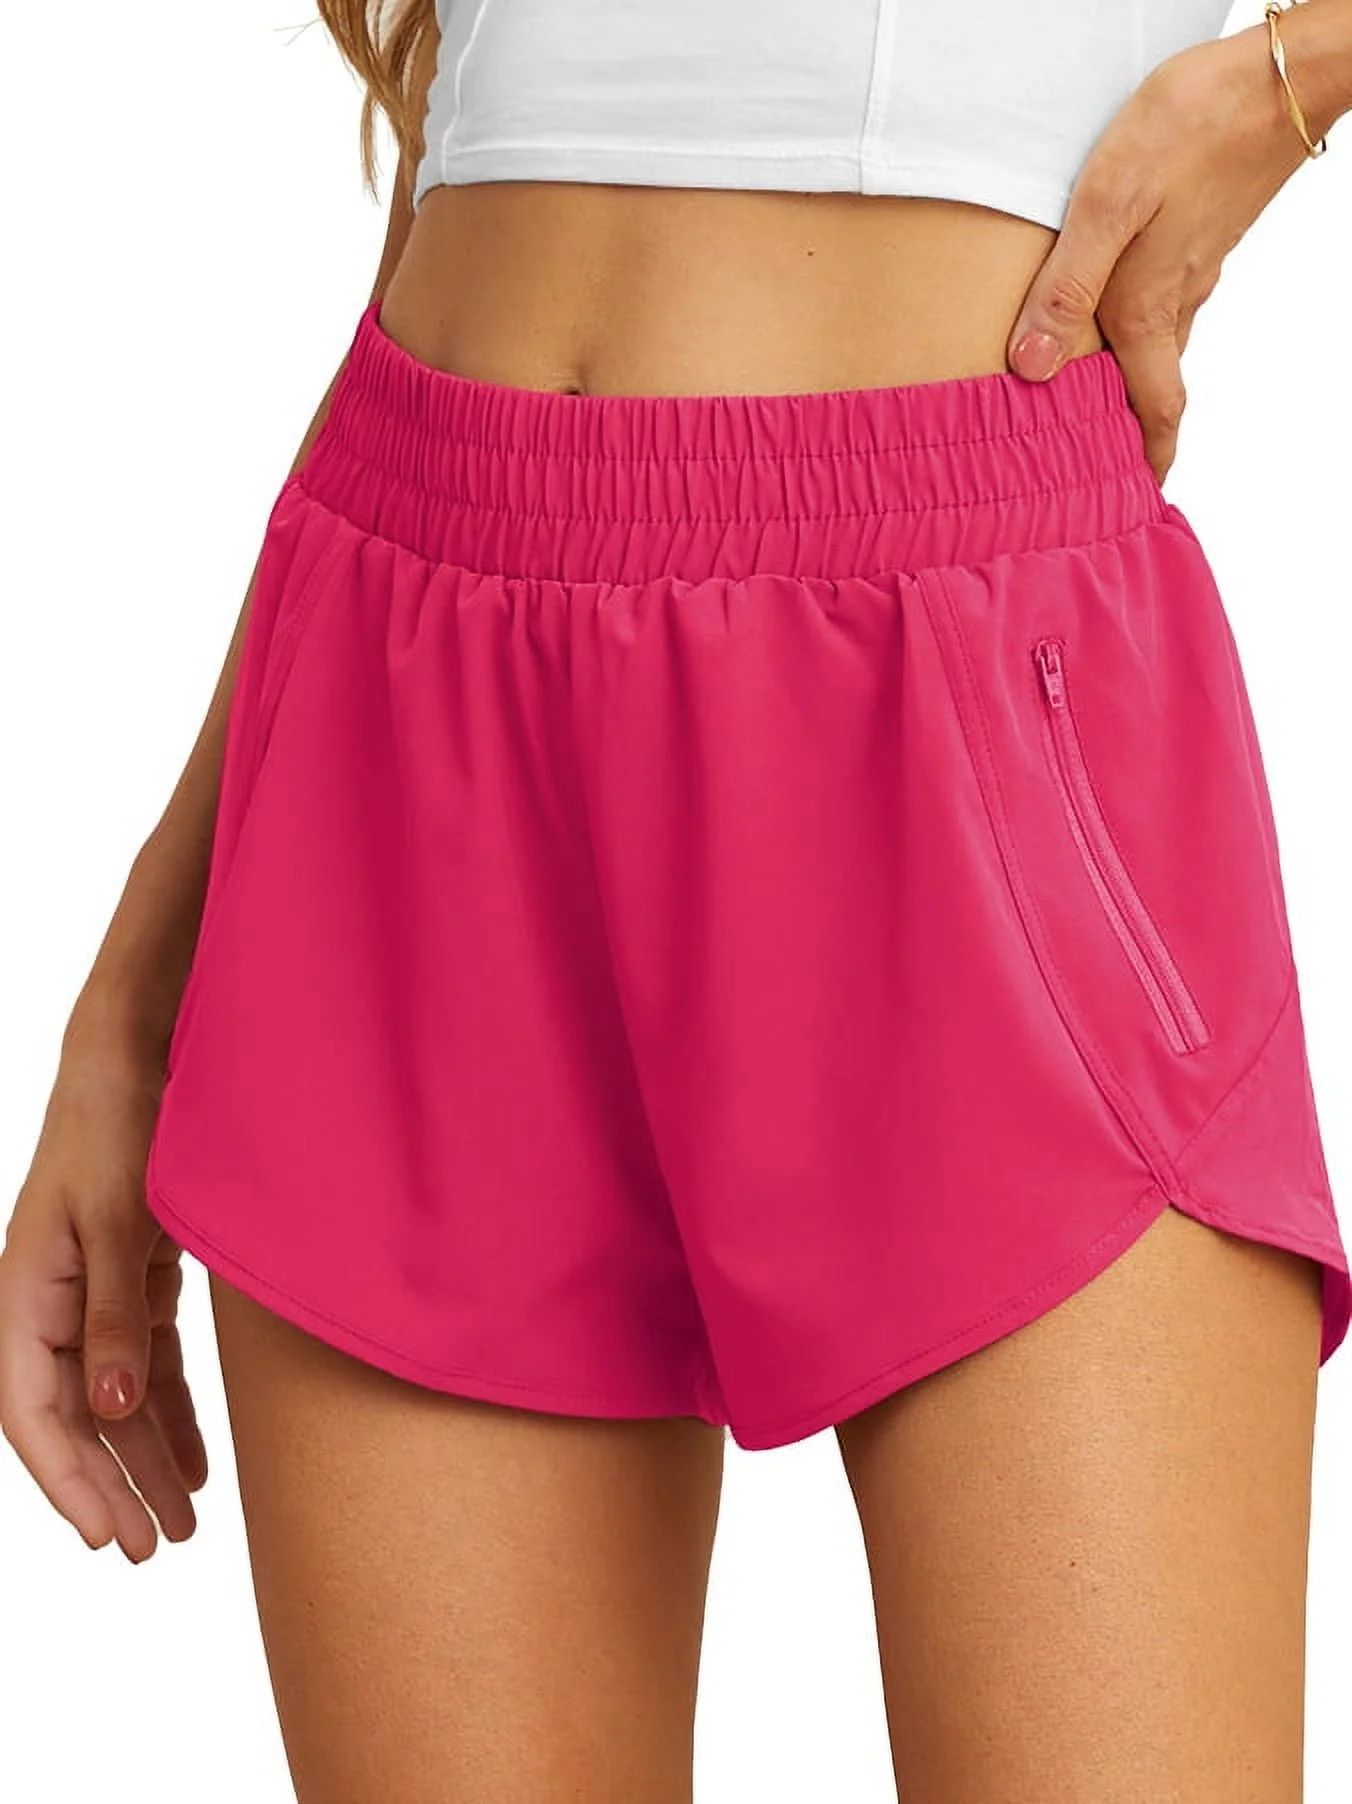 Cueply Women's Running Shorts High Waisted Athletic Gym Workout Shorts with Liner Zipper Pockets | Walmart (US)